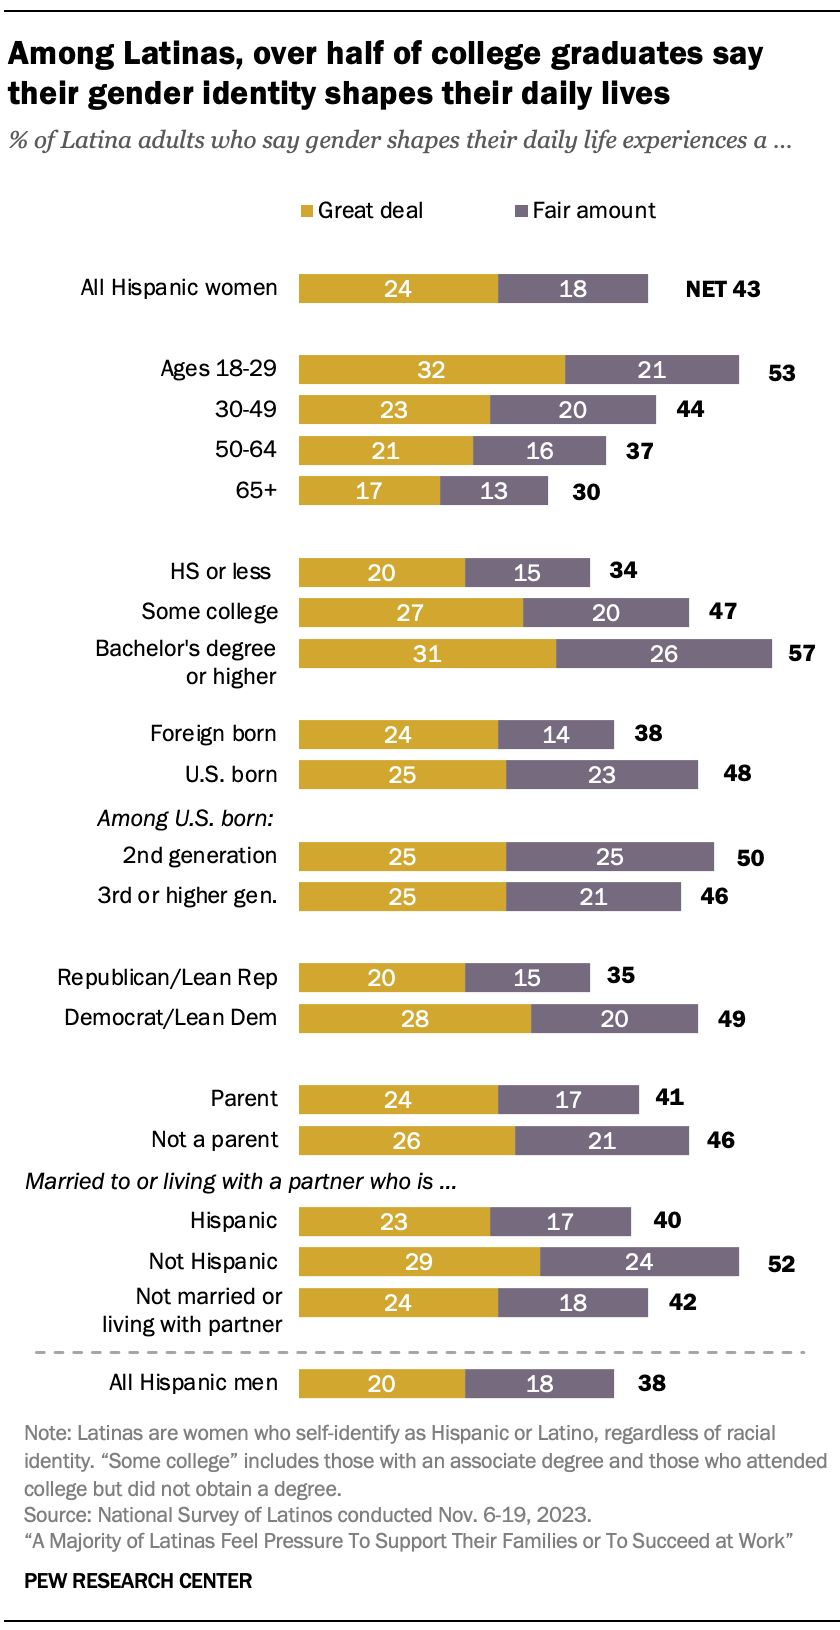 Chart comparing demographic groups of U.S. Latinas and their views of how gender shapes their daily life experiences. Among Latinas, over half of college graduates say their gender identity shapes their daily lives